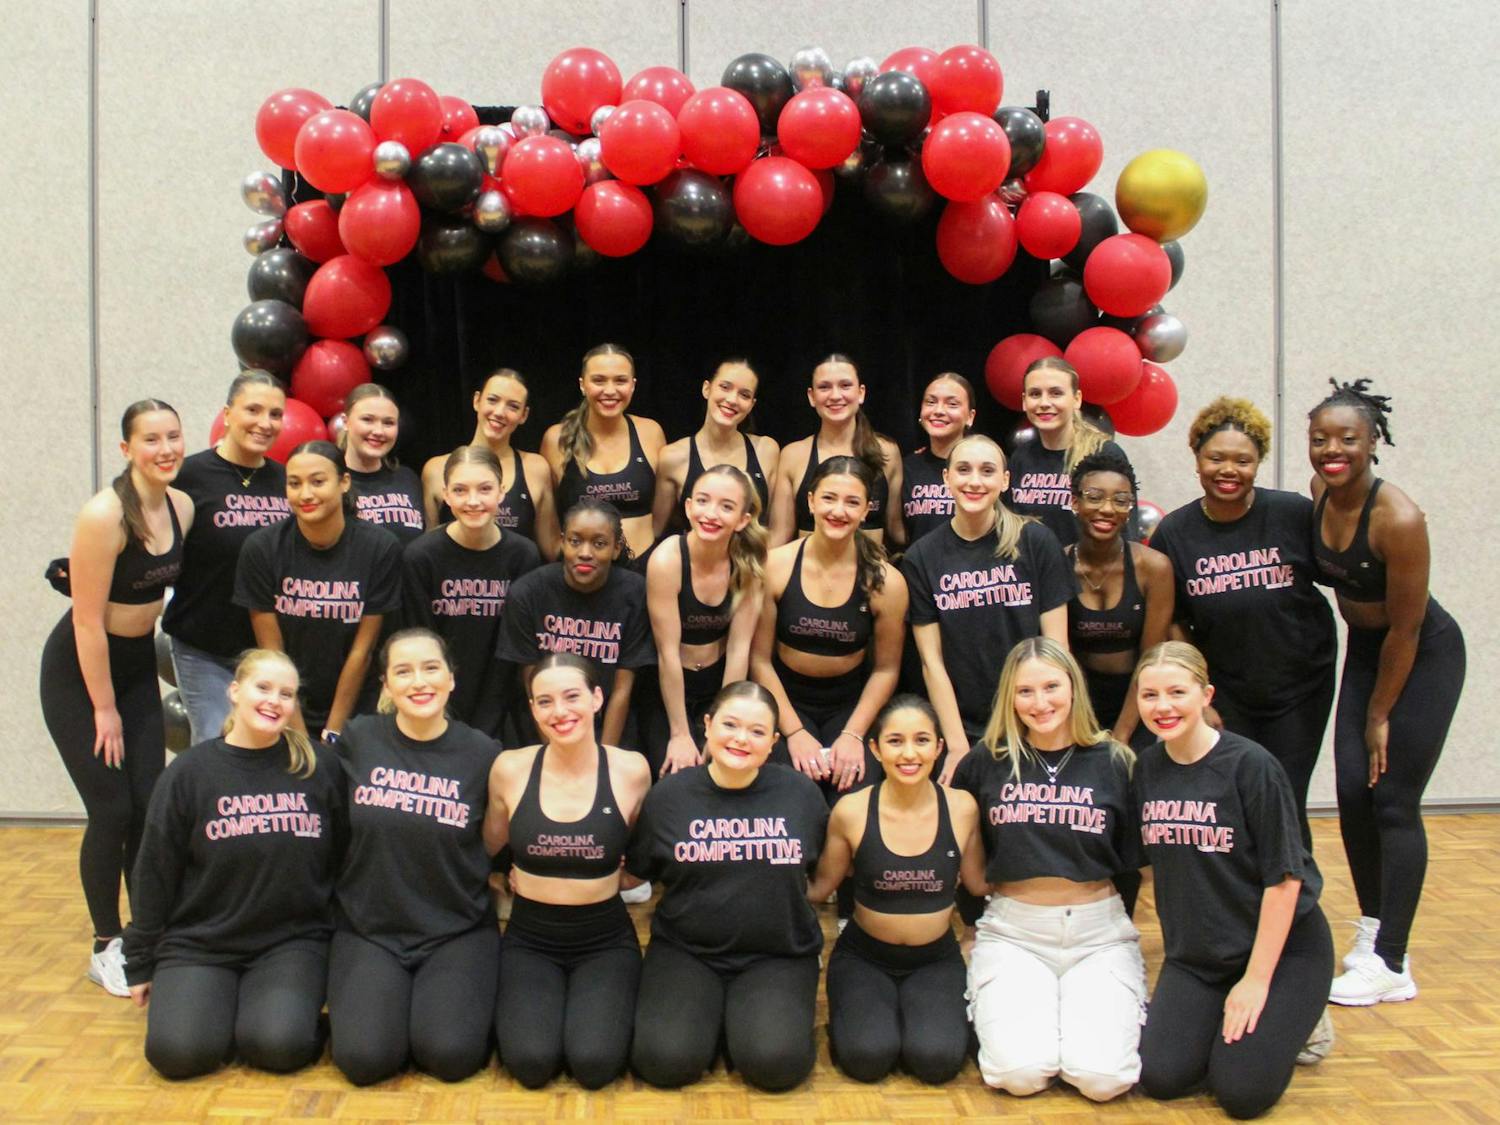 The Carolina Competitive Dance Club poses for a group picture on Dec. 5, 2023, in the Russell House Ballroom. The 2023-24 academic year is the club's first year on campus.